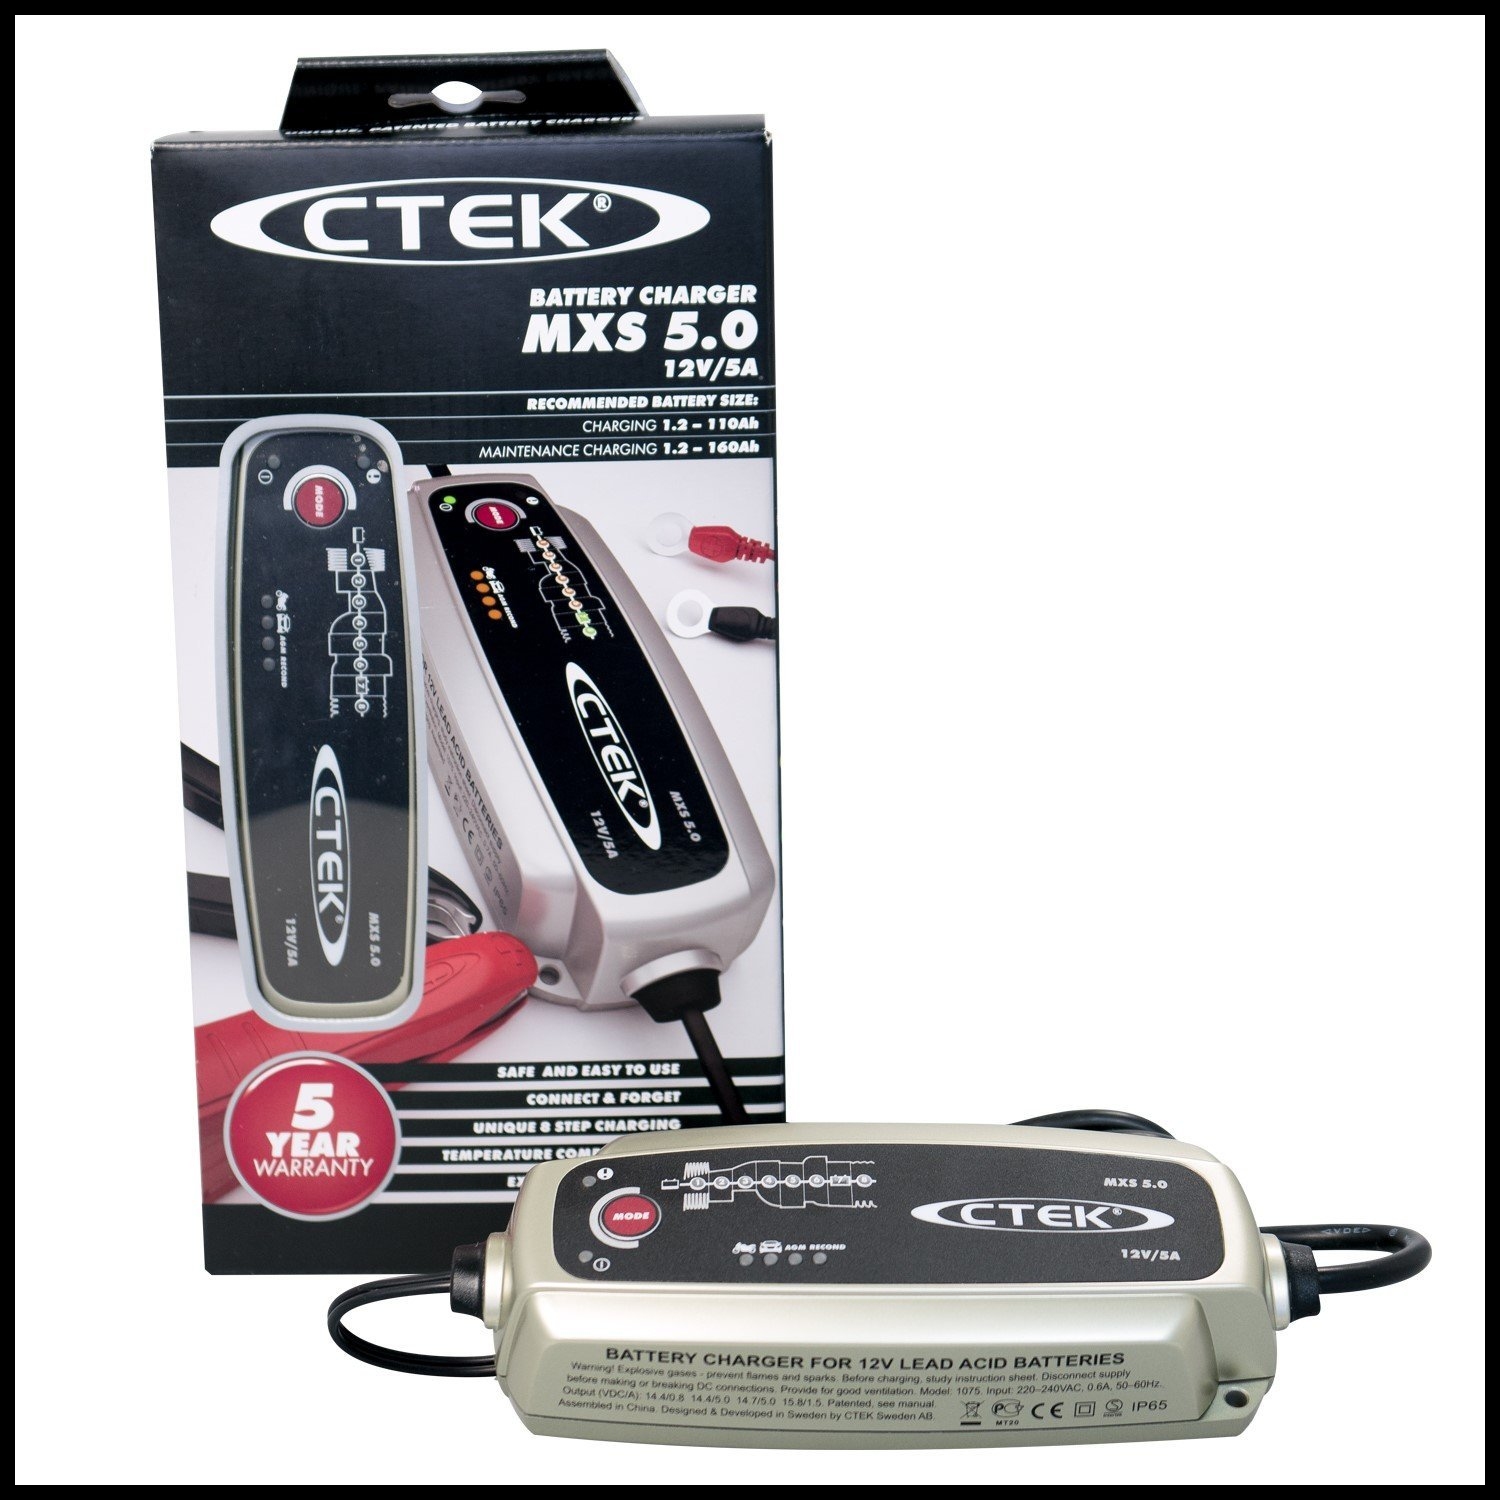 CTEK MXS 5 0 Fully Automatic Battery Charger Charges Maintains and Reconditions Car and Motorcycle Batteries 12V 5 Amp UK Plug Amazon Car &